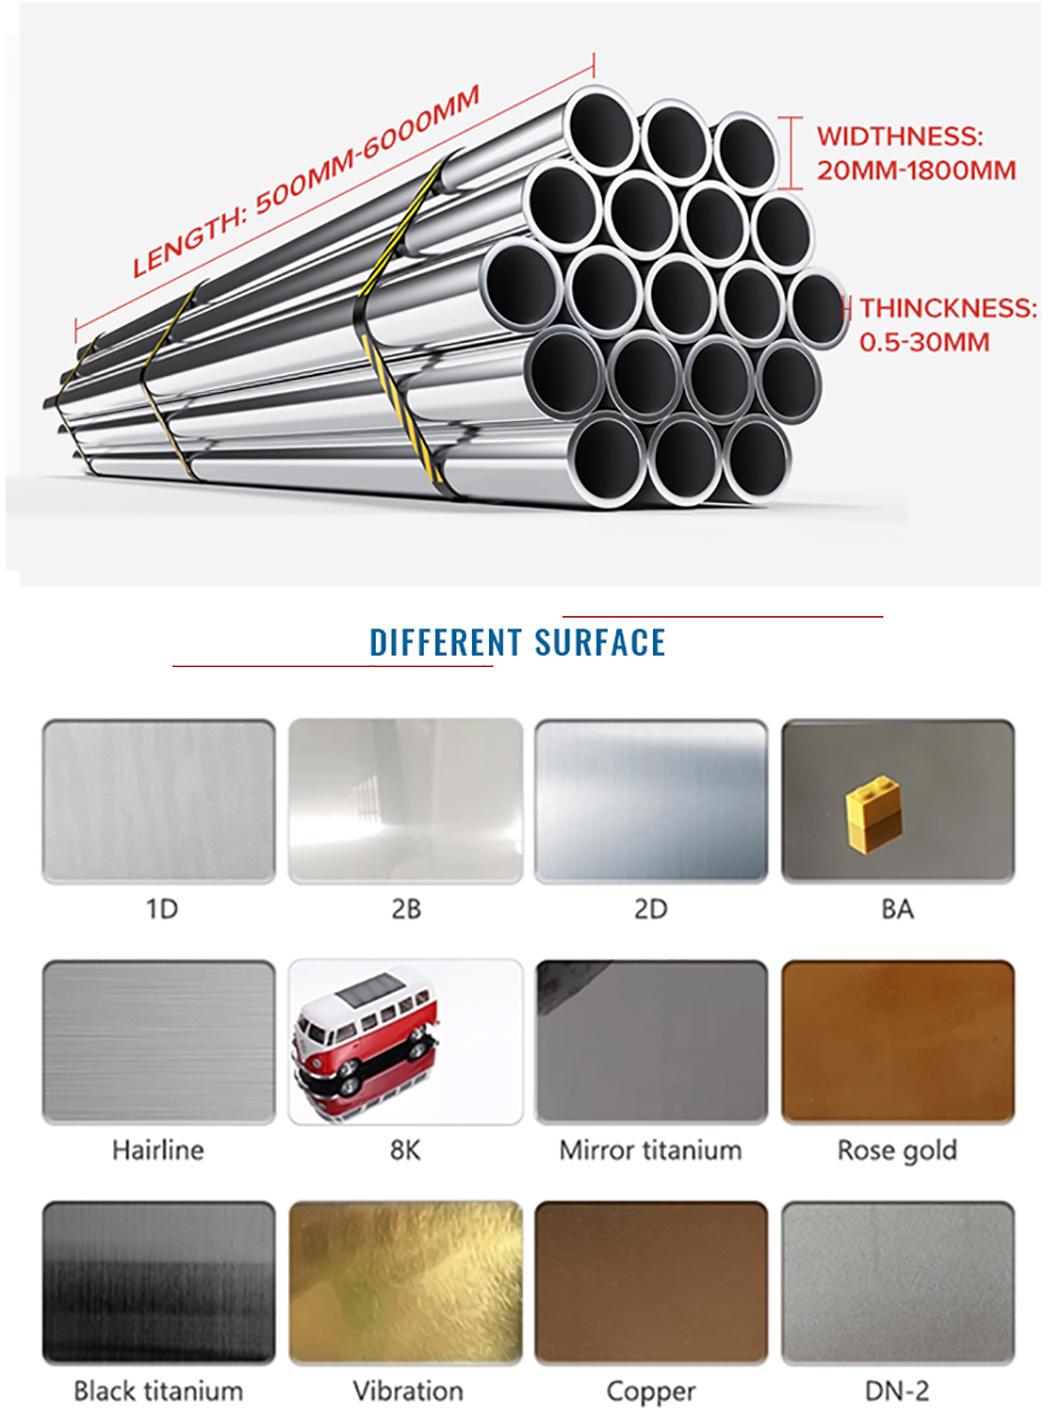 DIN 1.4571 1.4401 1.4403 No. 1 Finished Pickling ASTM A380 Seamless Stainless Steel Industrial Tubes